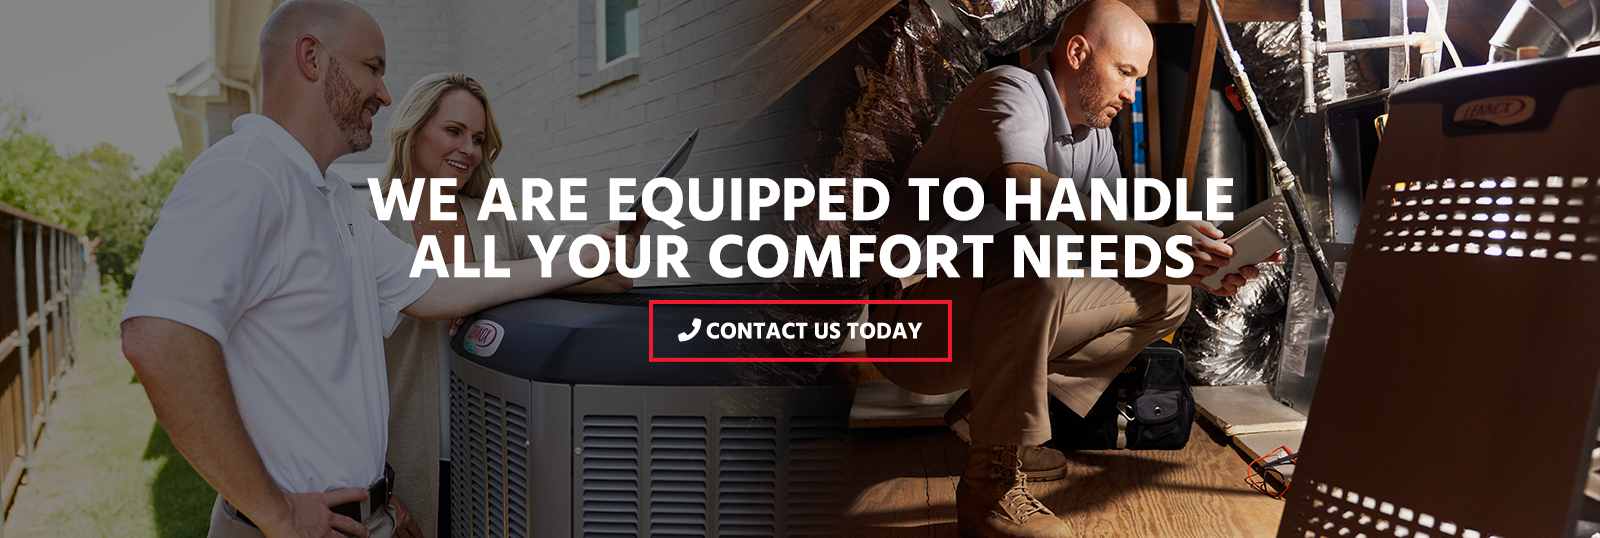 Jesse Heating & Air Conditioning - We Are Equipped To Handle All Your Comfort Needs